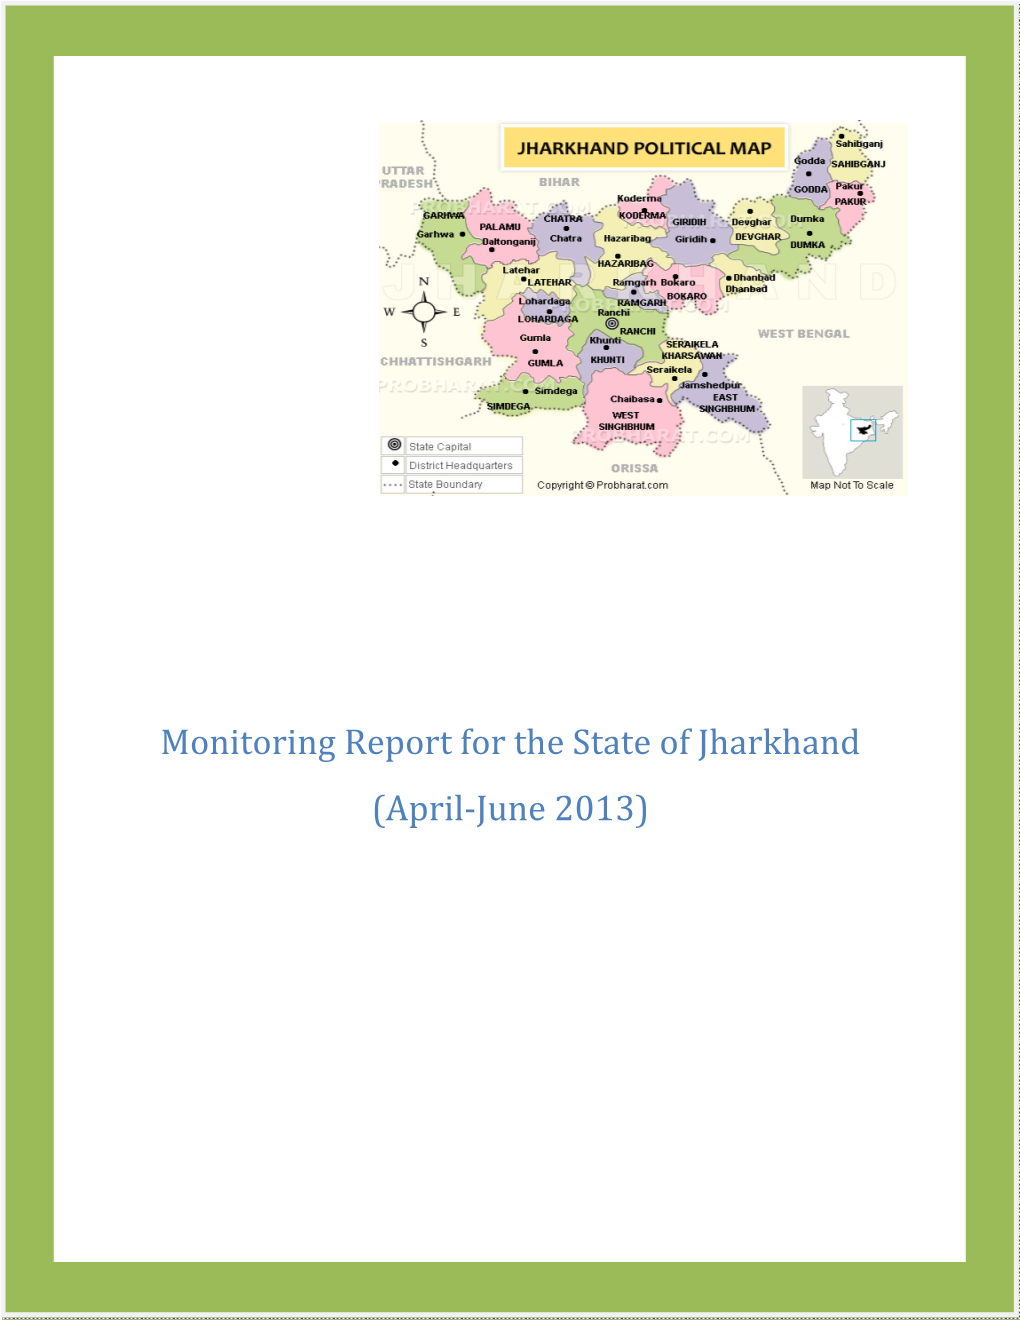 Monitoring Report for the State of Jharkhand (April-June 2013)